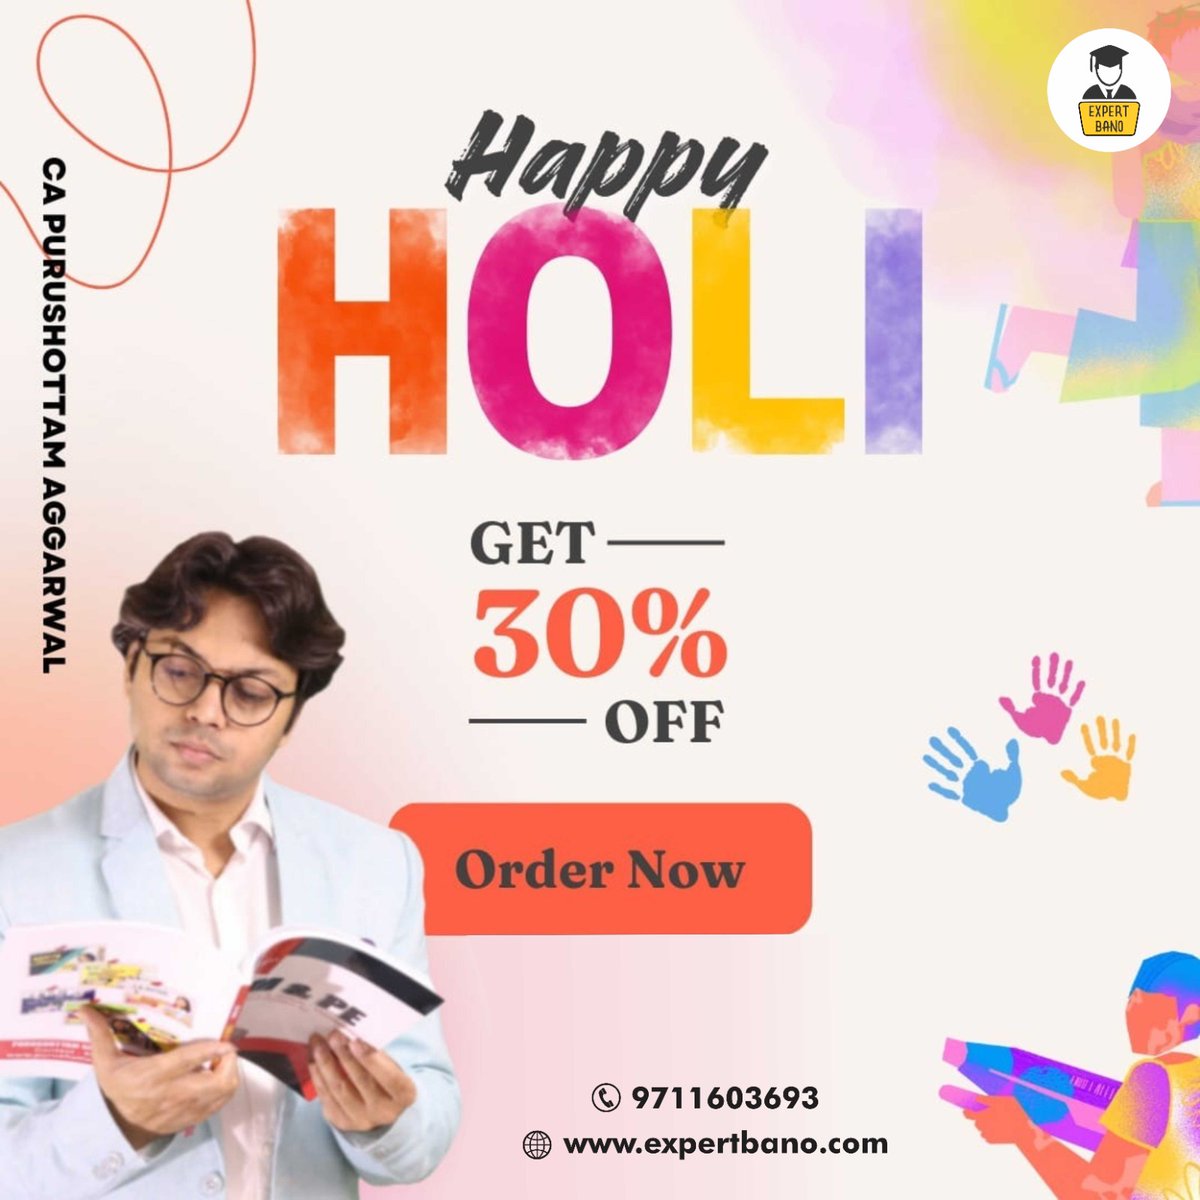 Holi Offer !!! Get upo 30% off on CA Inter Cost Regular and Fast Track Lectures by CA Purushottam Aggarwal.
Buy @  bit.ly/3nUuLZQ
Call on 9711603693 for inquiries.
#CAintercost #capurushottamaggarwal #caexams #expertbano #cafinalcosting #caexams #CA #CAOnline